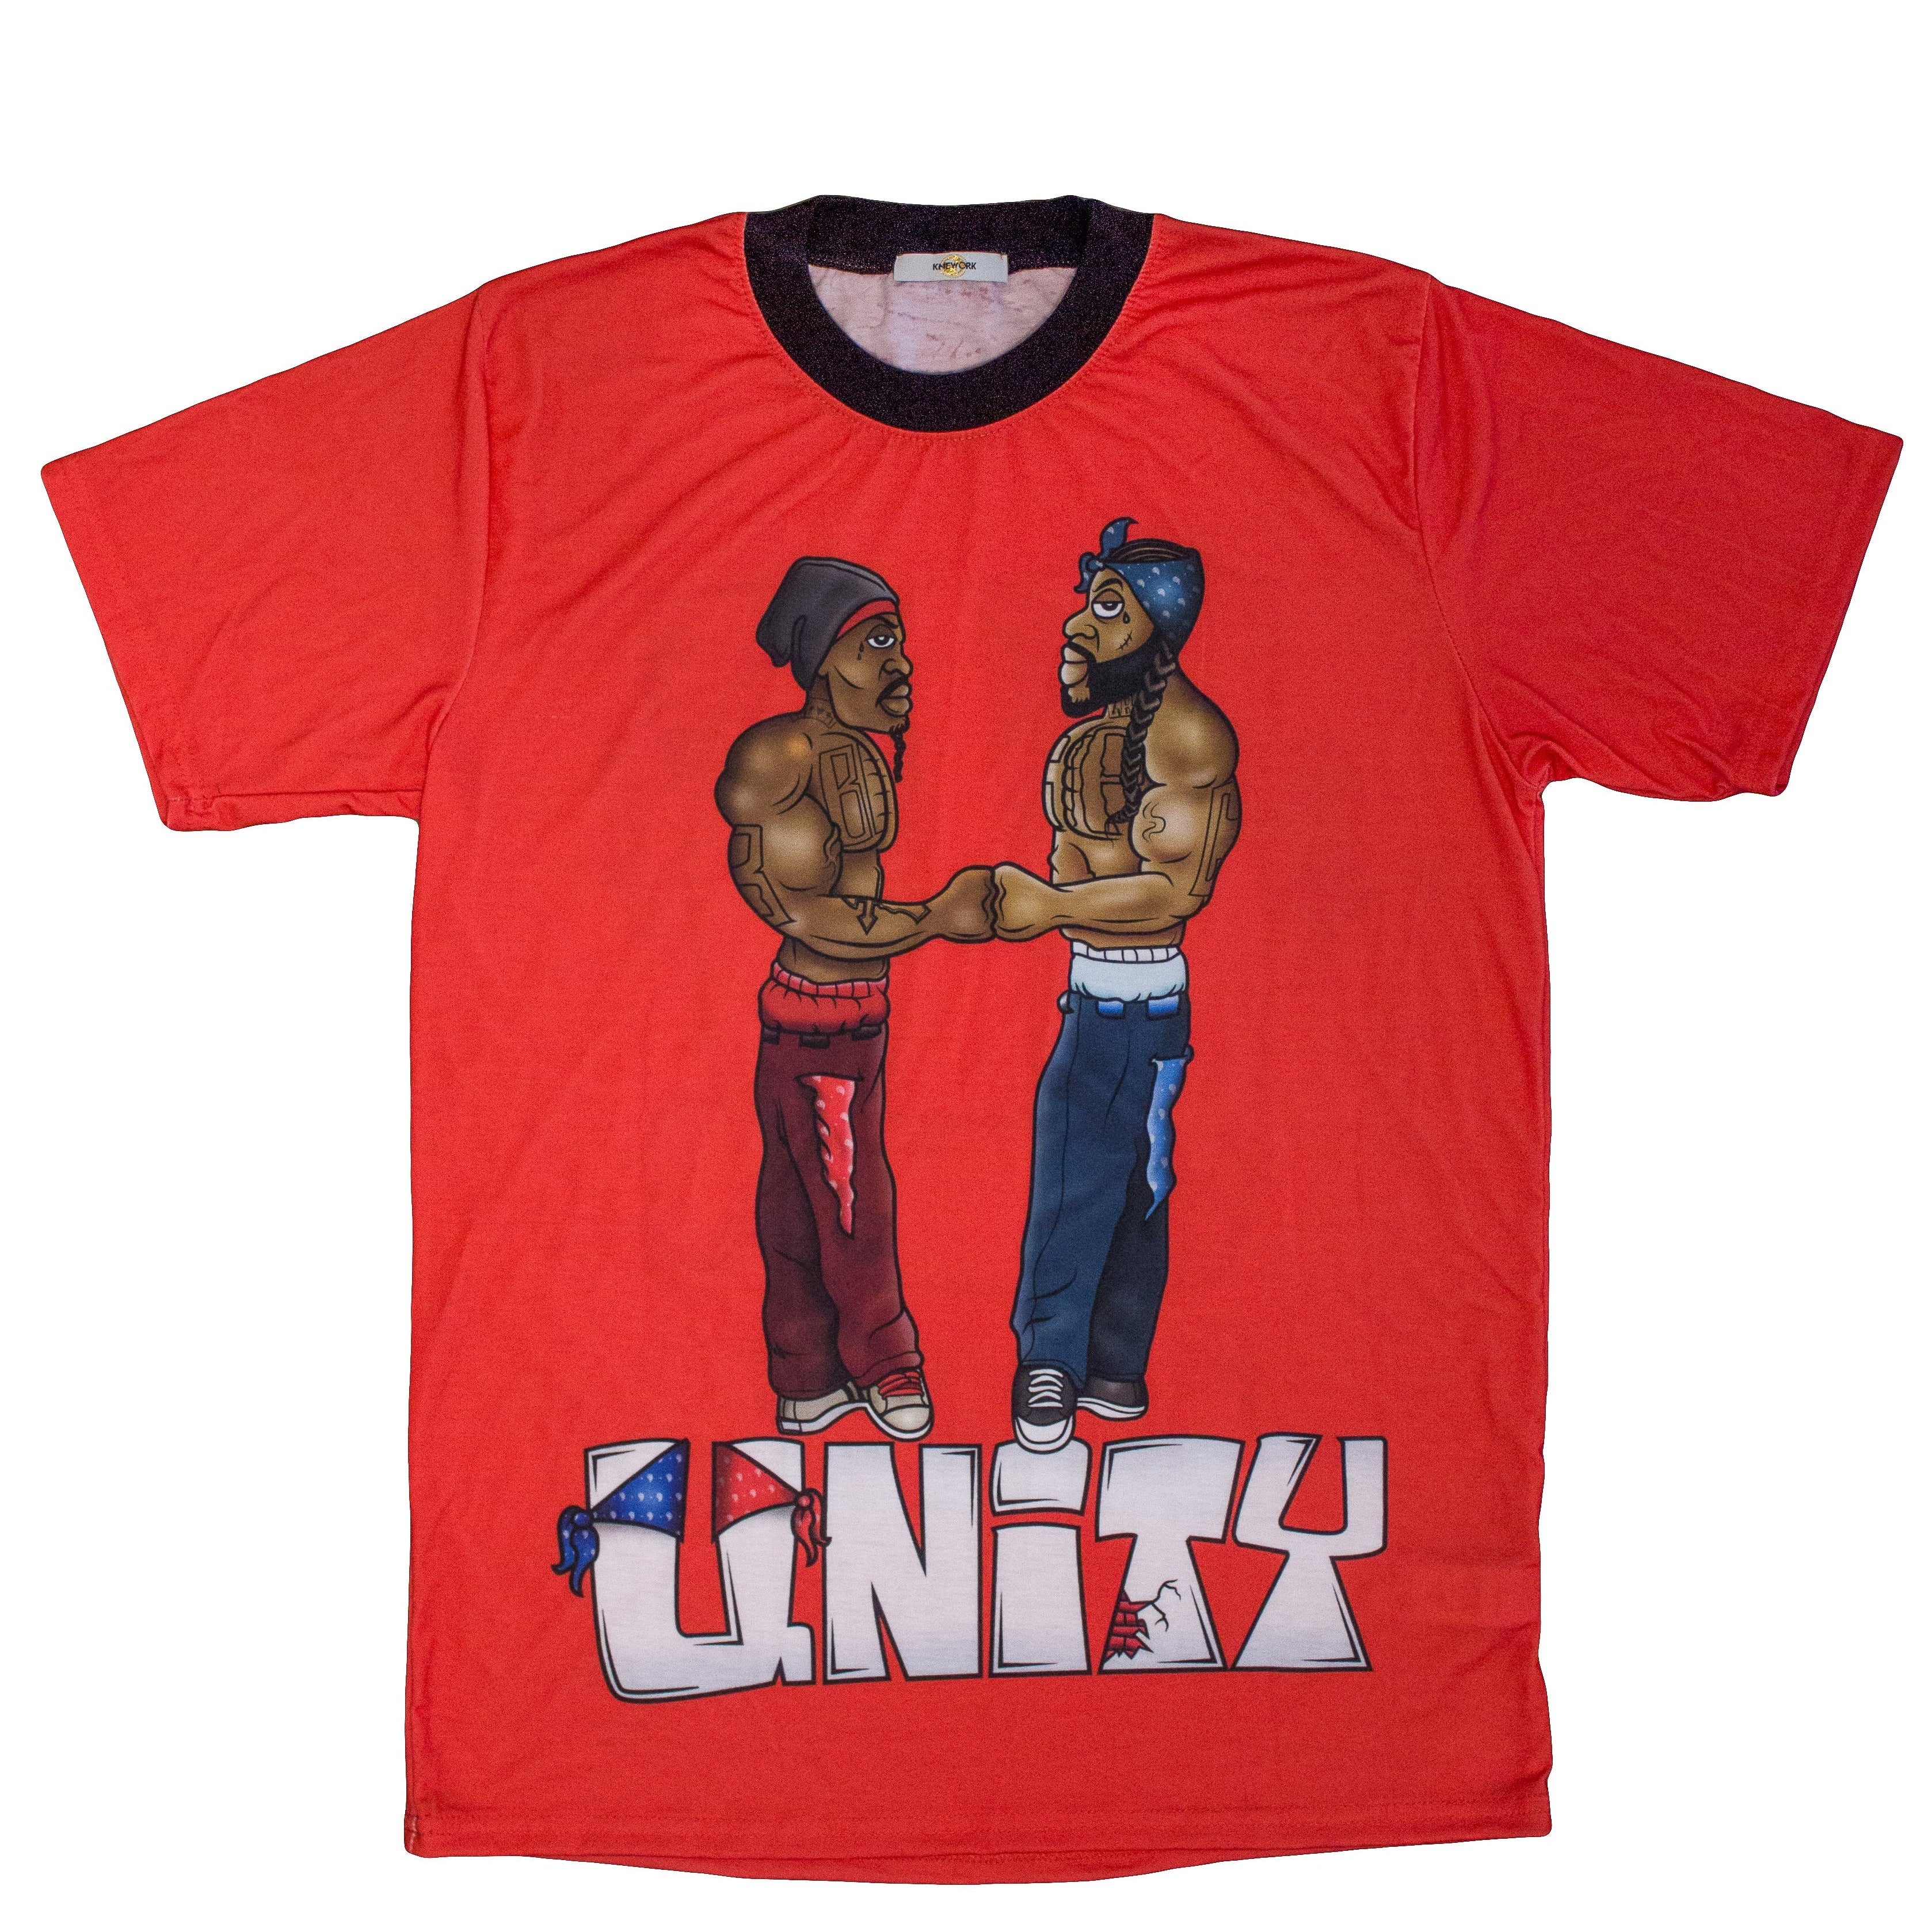 The Unity T-Shirt Red Image 1